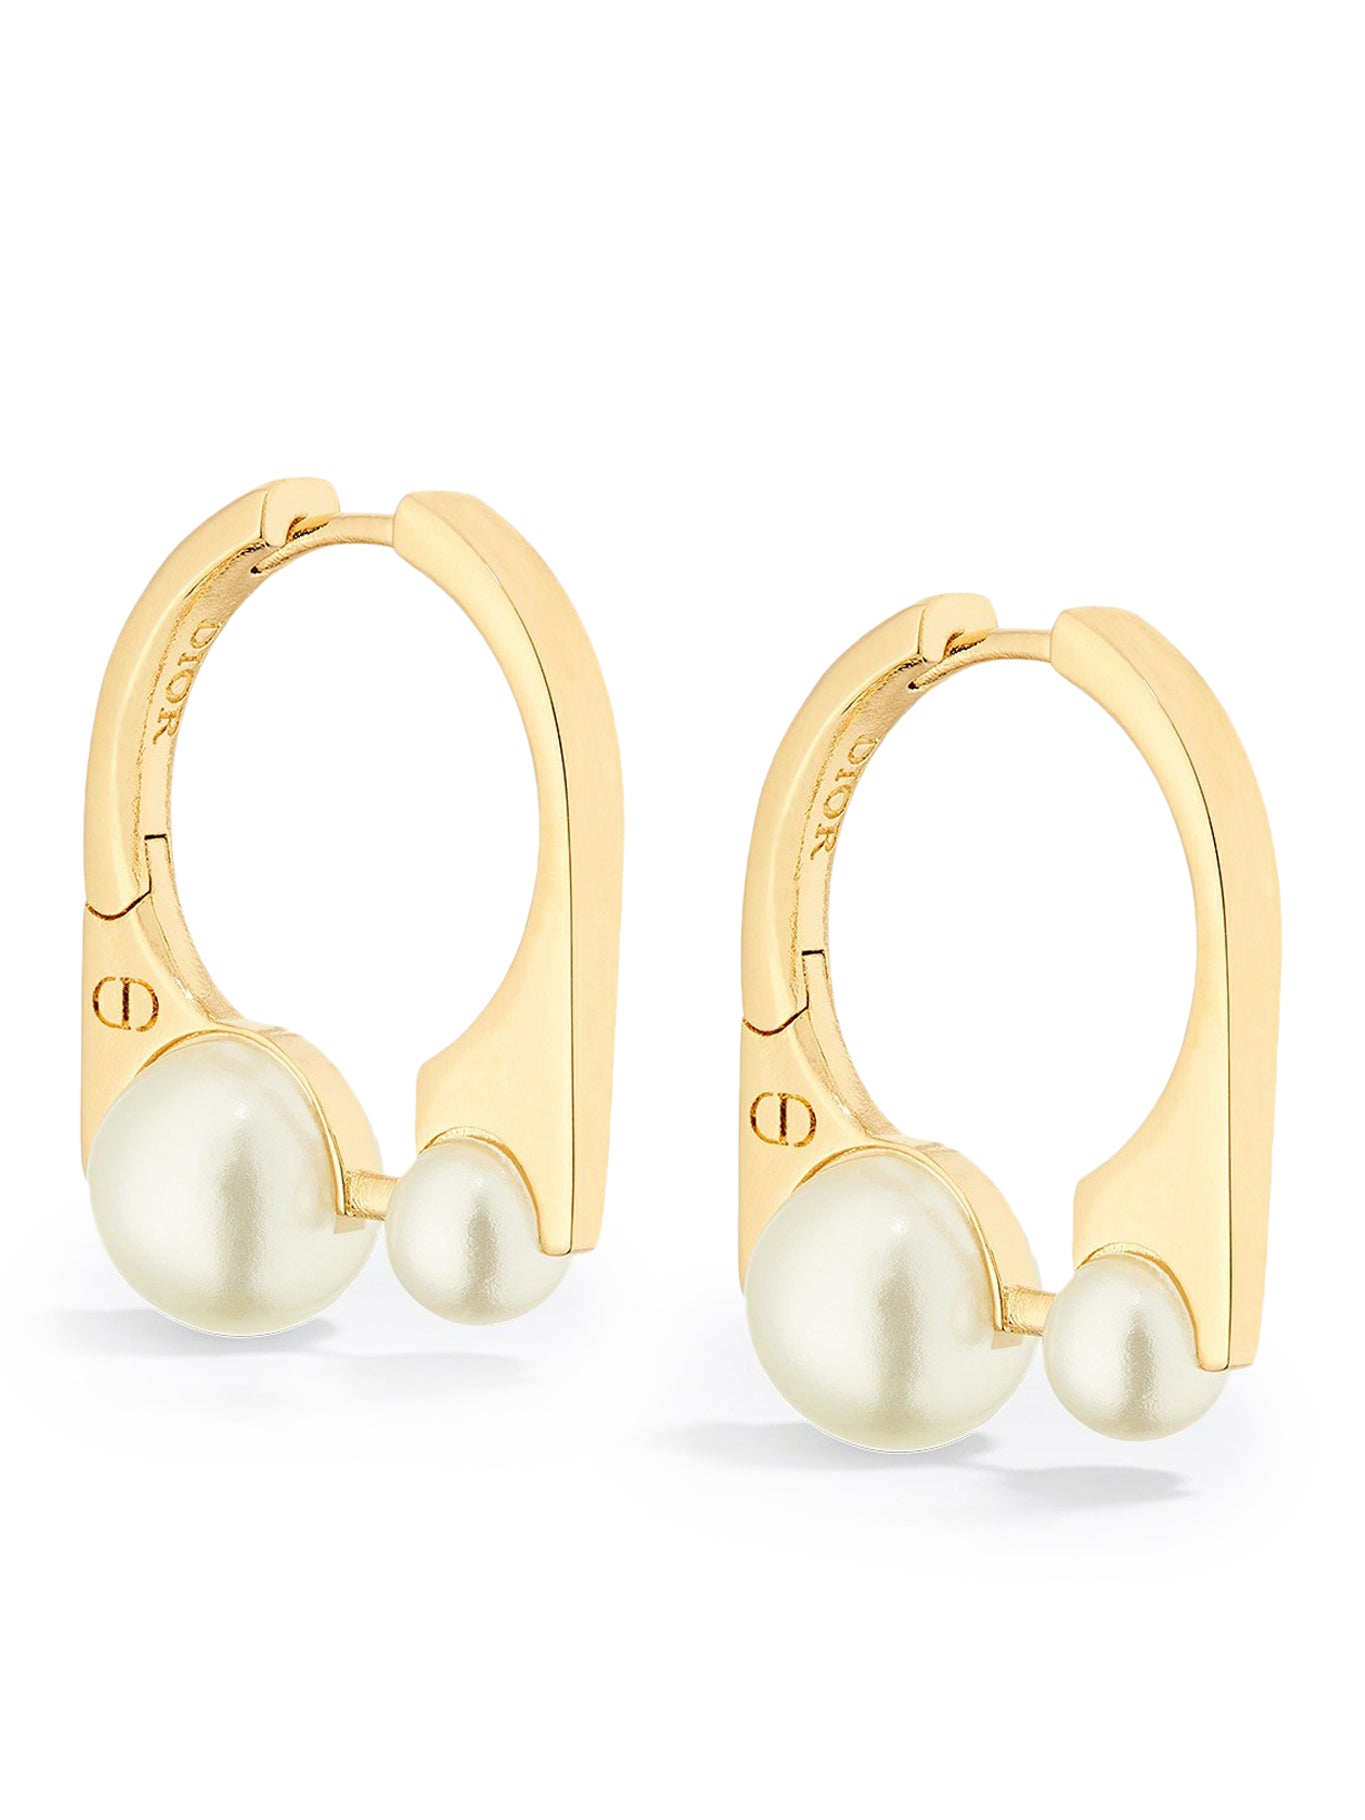 Dior Tribales New Look small earrings